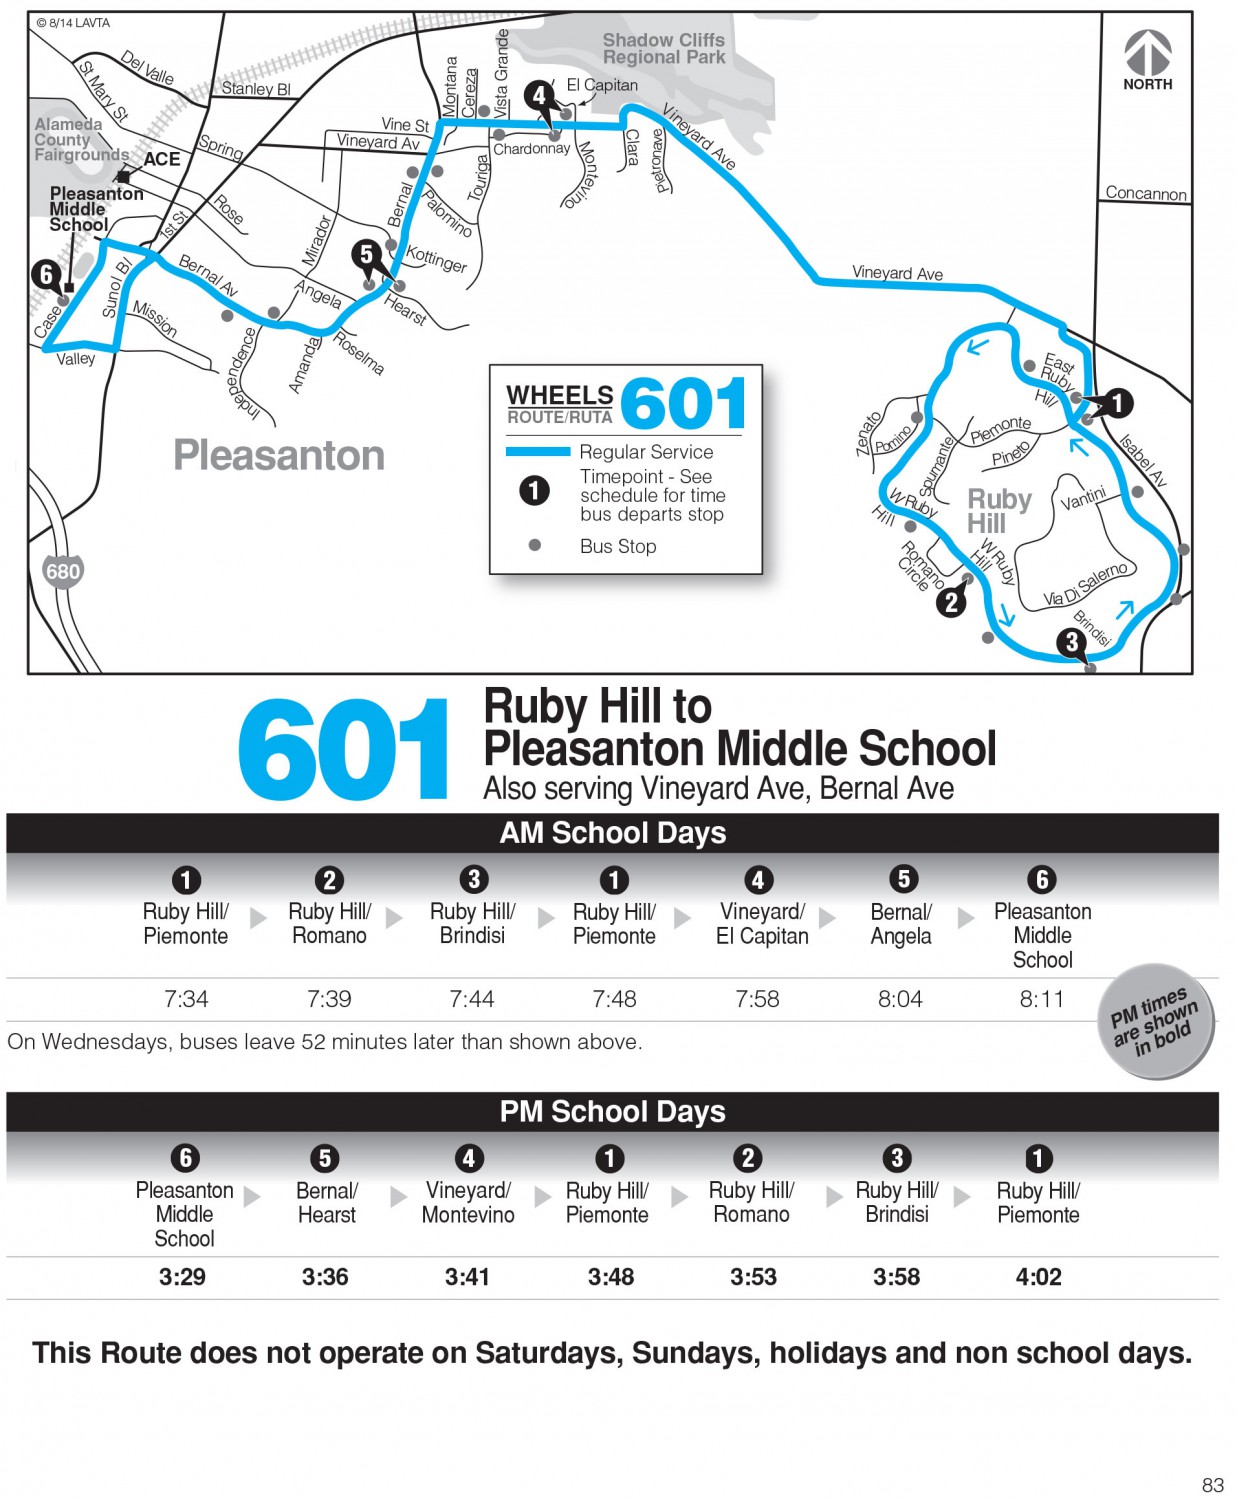 Wheels route 601 map and schedule